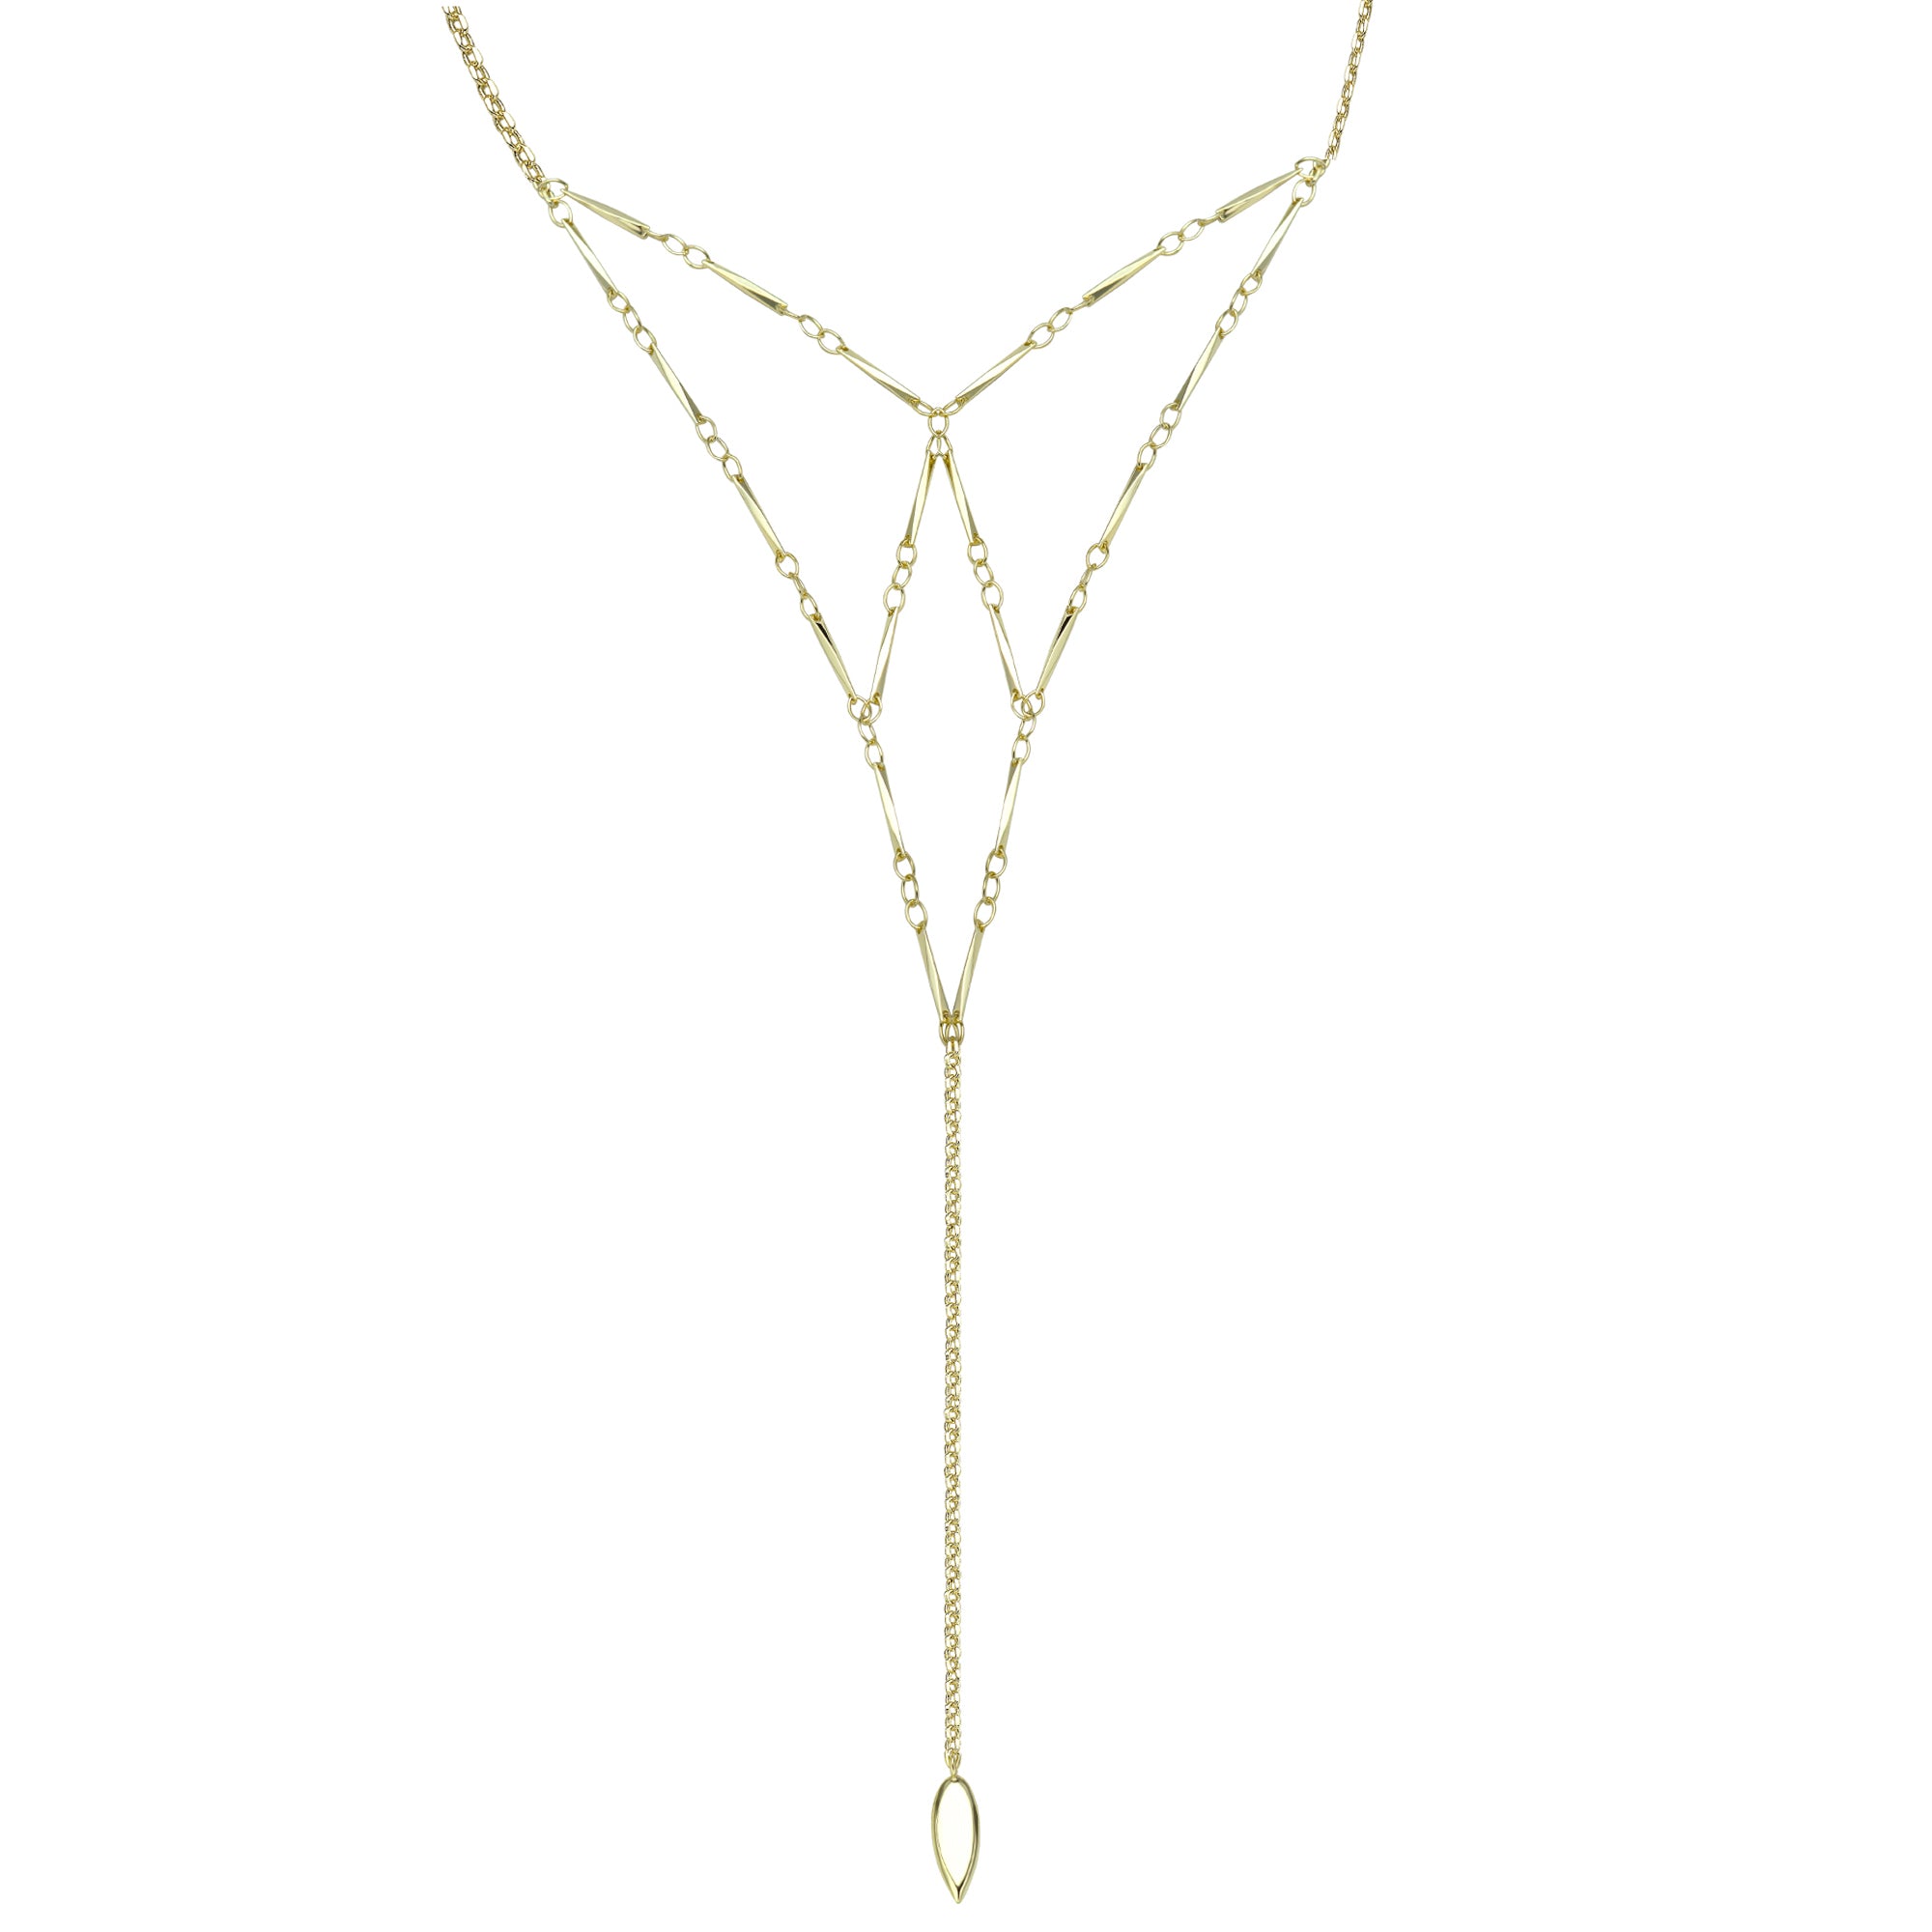 Free Spirit Necklace in Gold